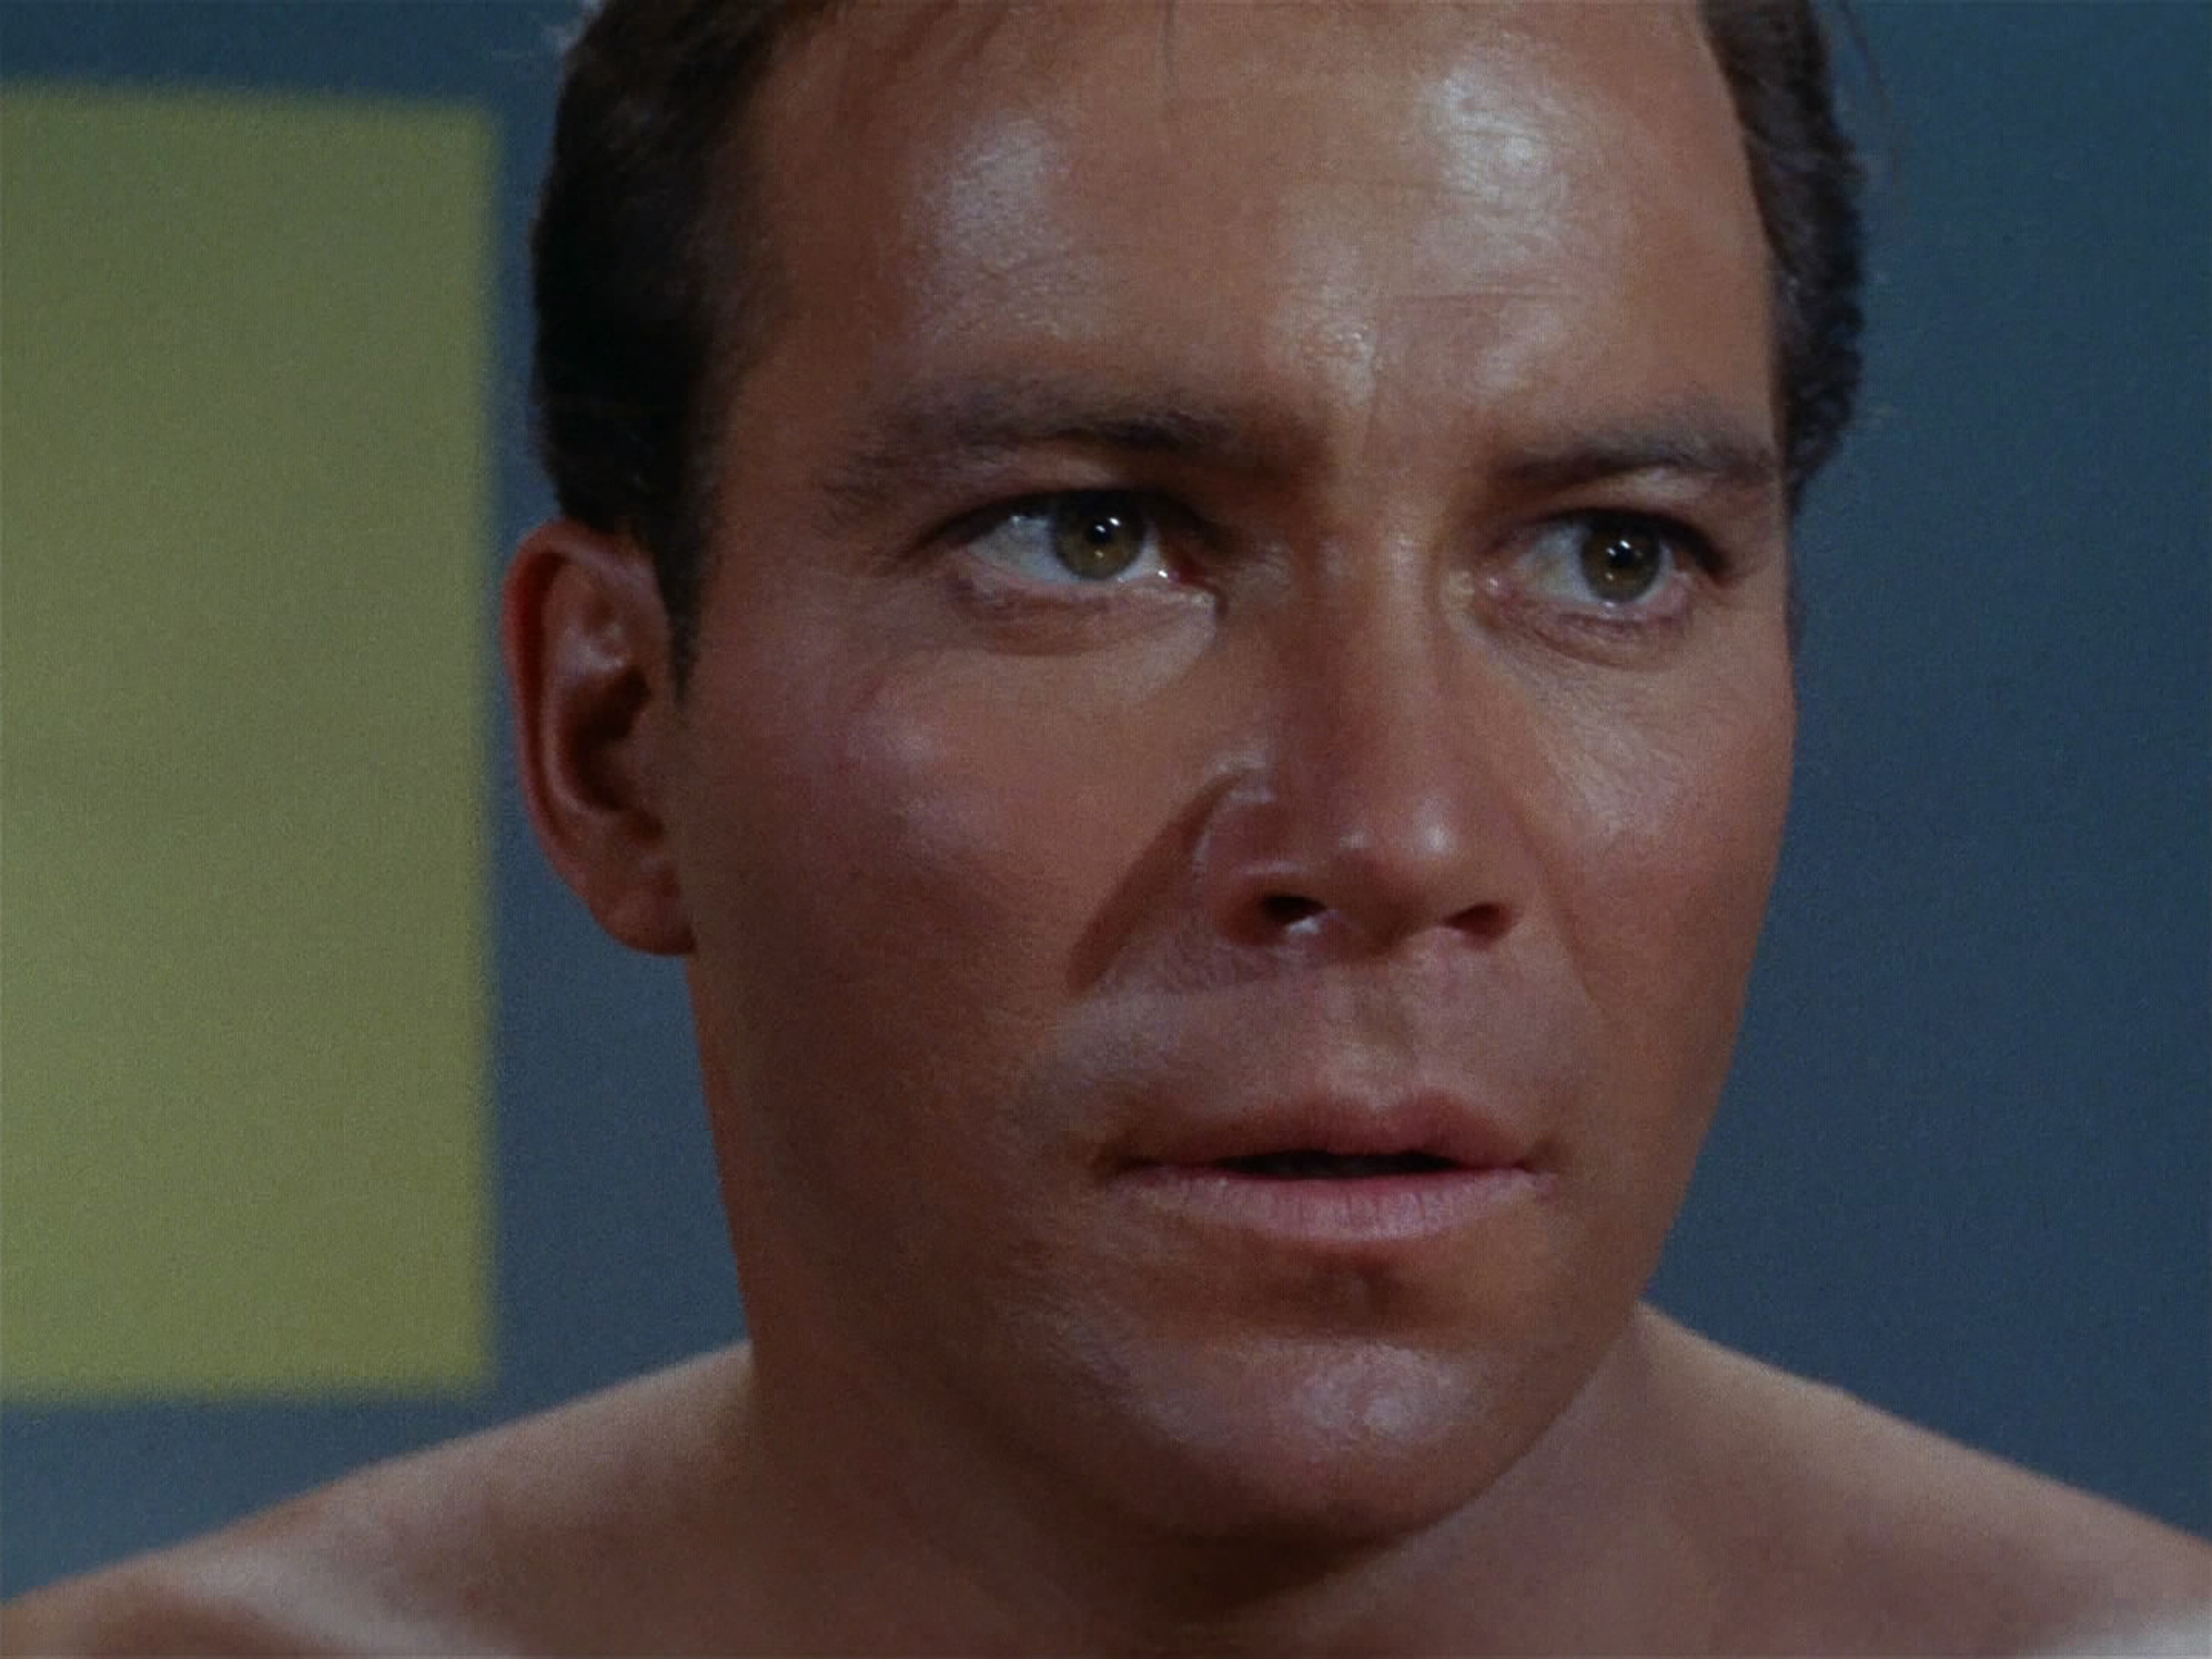 A closeup of William Shatner in the 1960s, around the same time he covered The Beatles' "Lucy in the Sky With Diamonds"